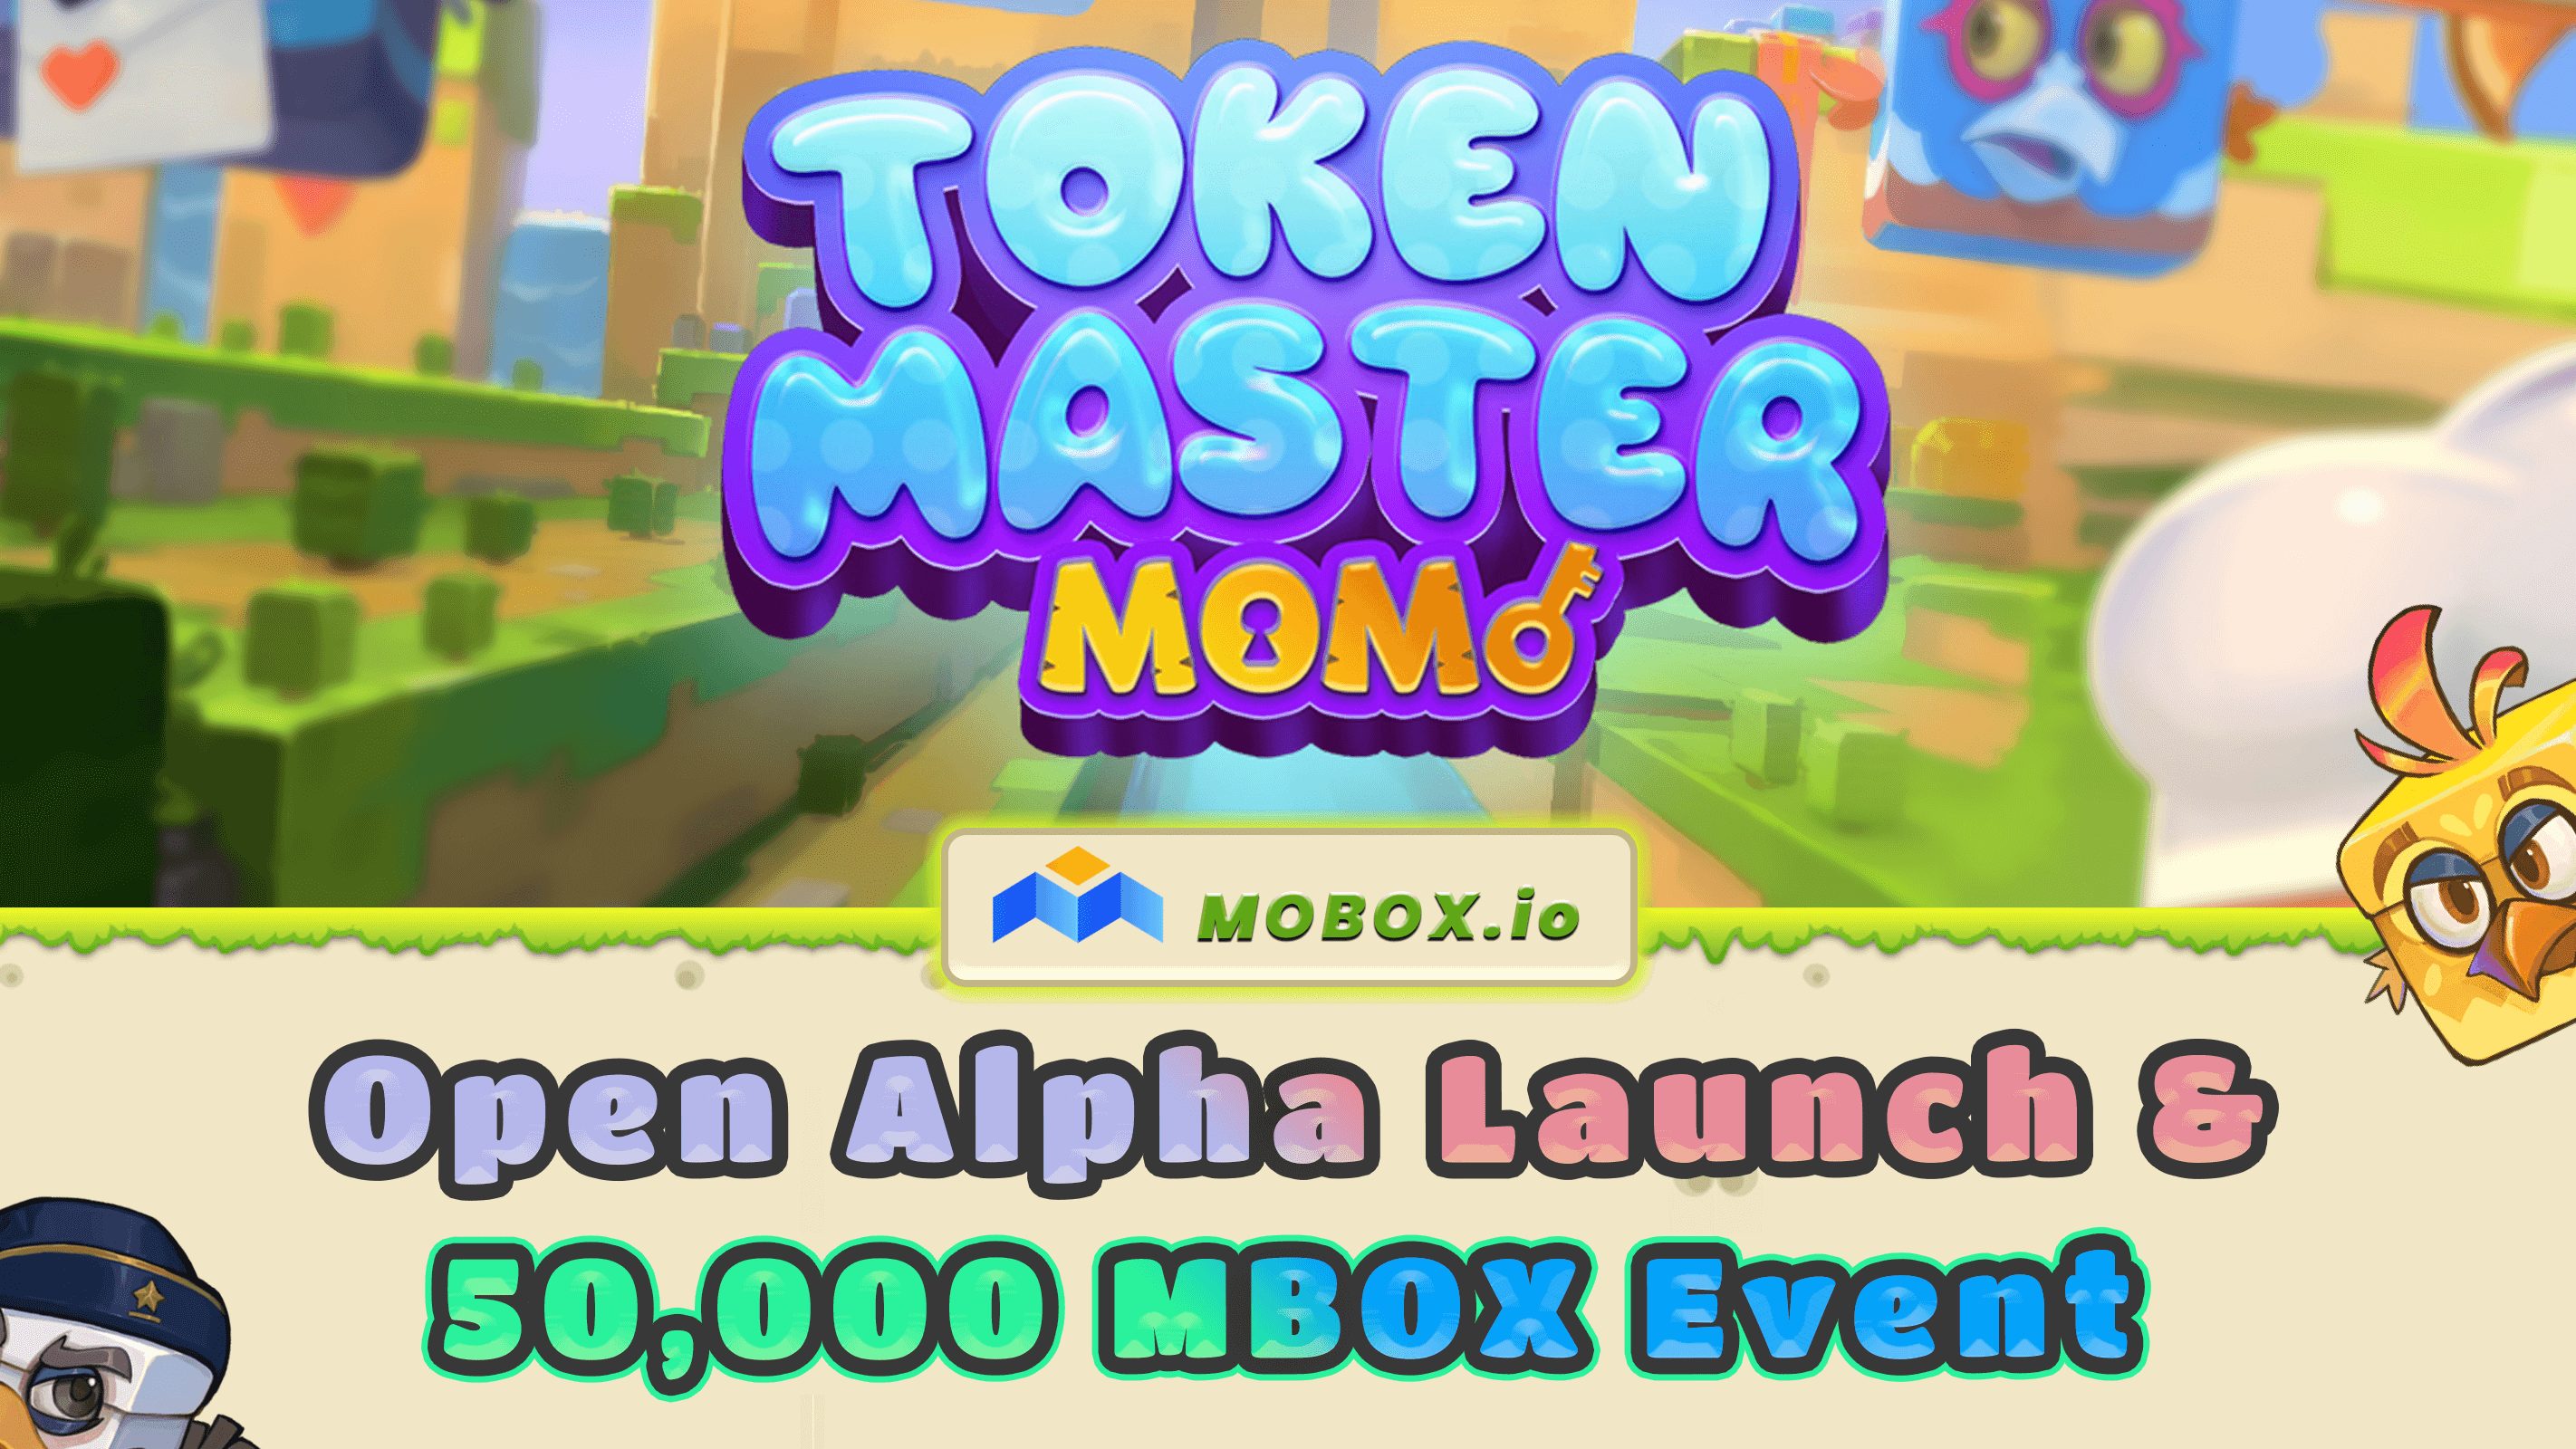 MOMO Token Master Launch by MOBOX